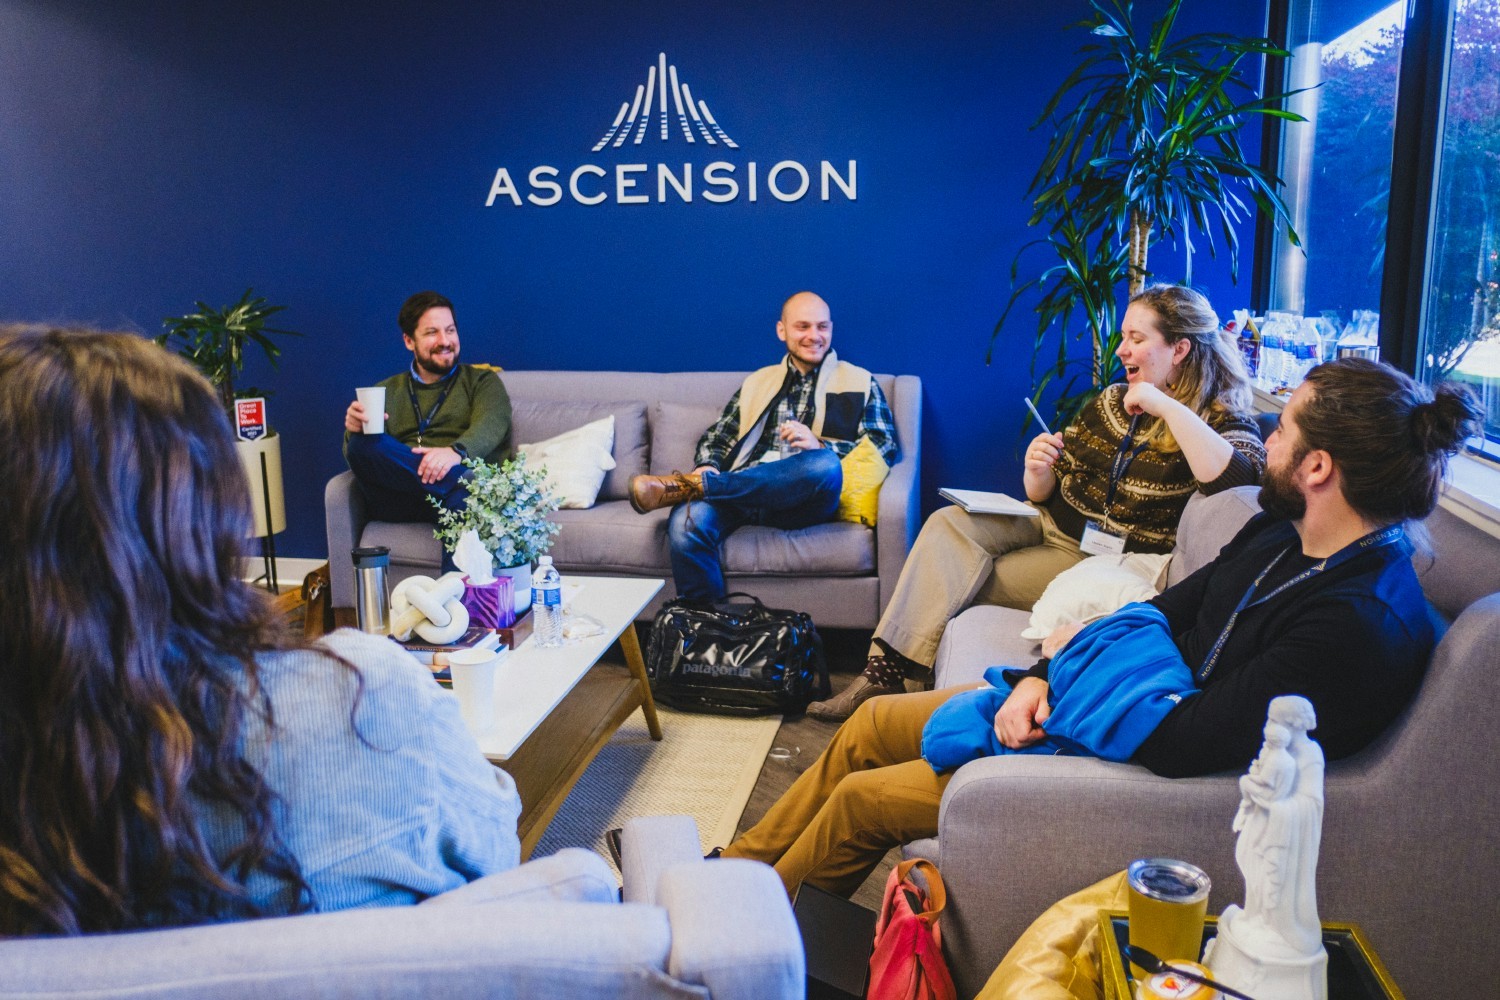 Ascension's Corporate Marketing team engaged in discussion during a team meeting.